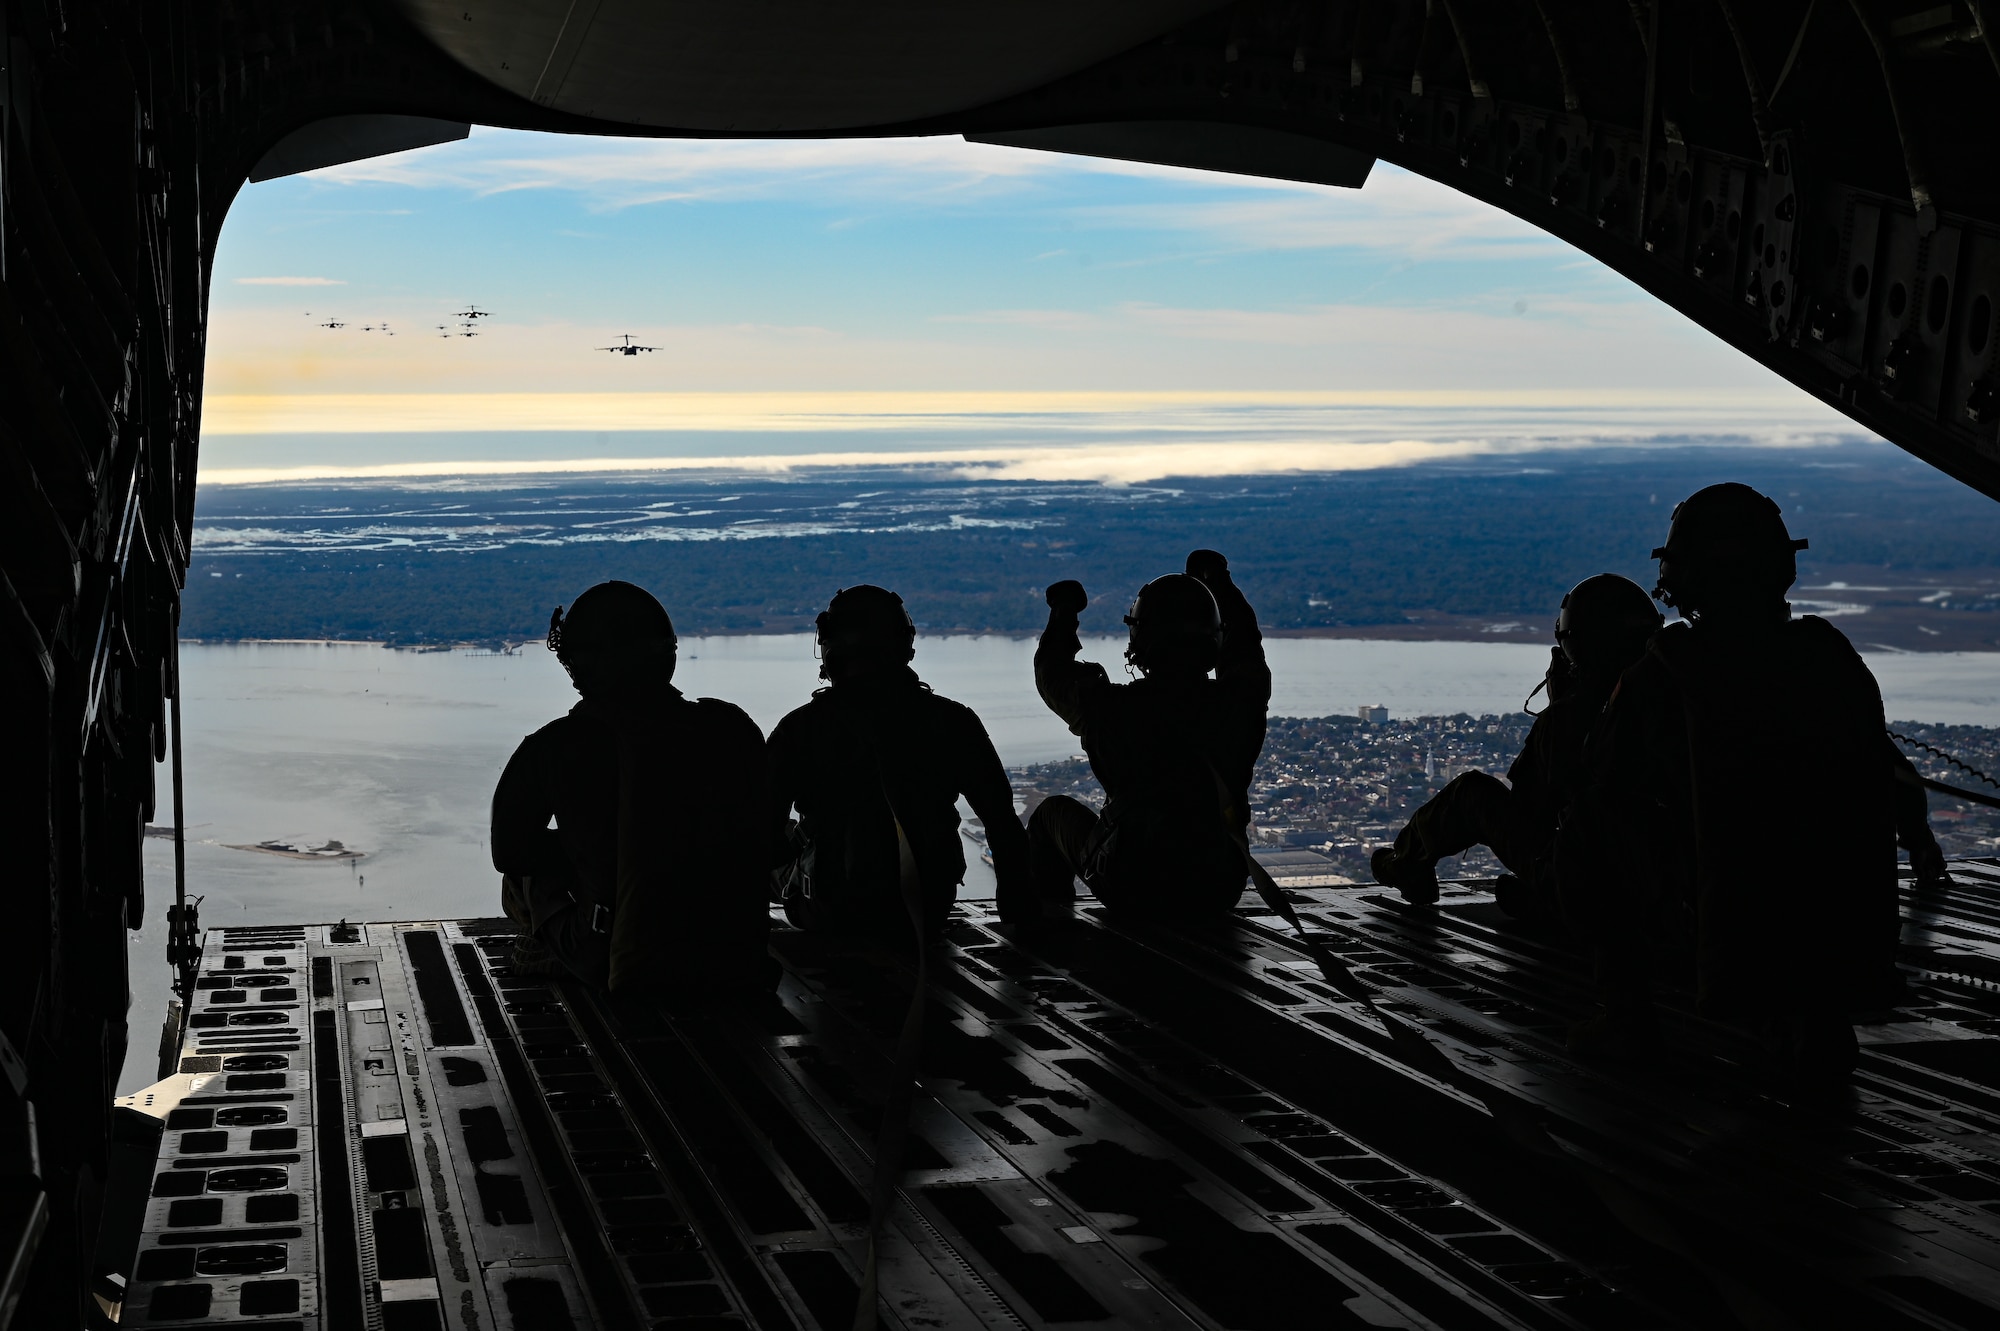 A silhouette of airmen direction other planes in the air.